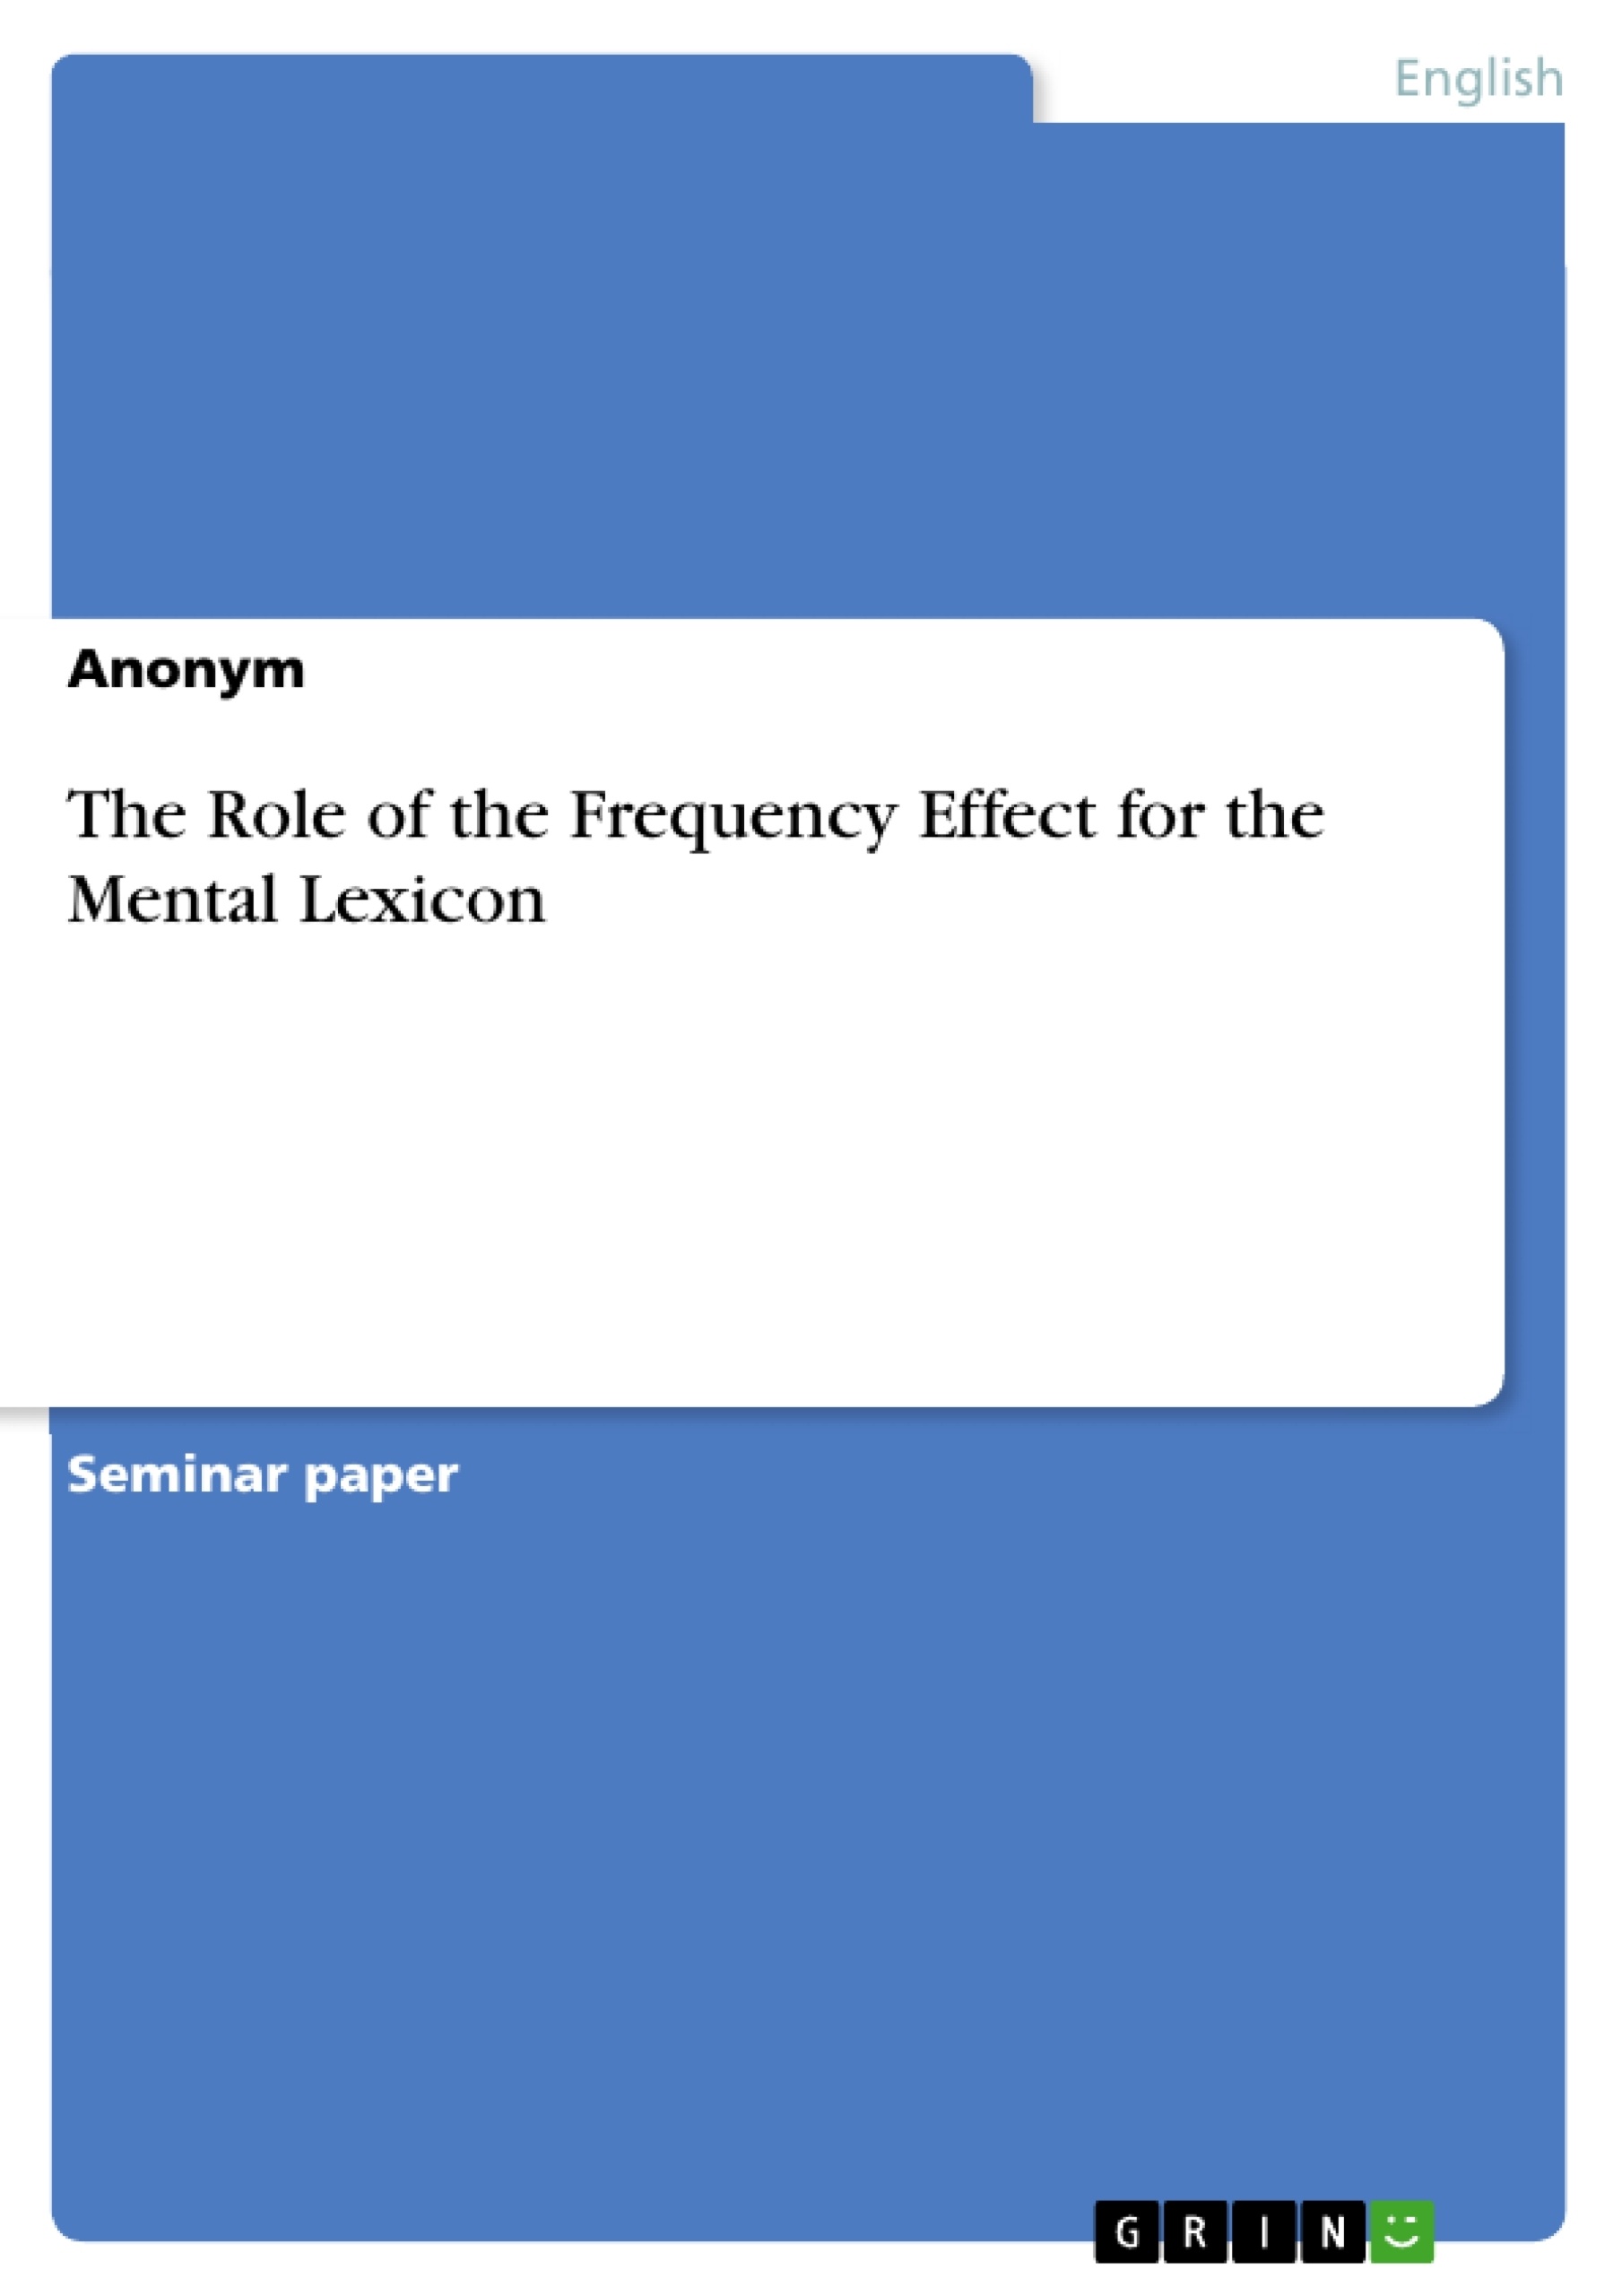 Title: The Role of the Frequency Effect for the Mental Lexicon